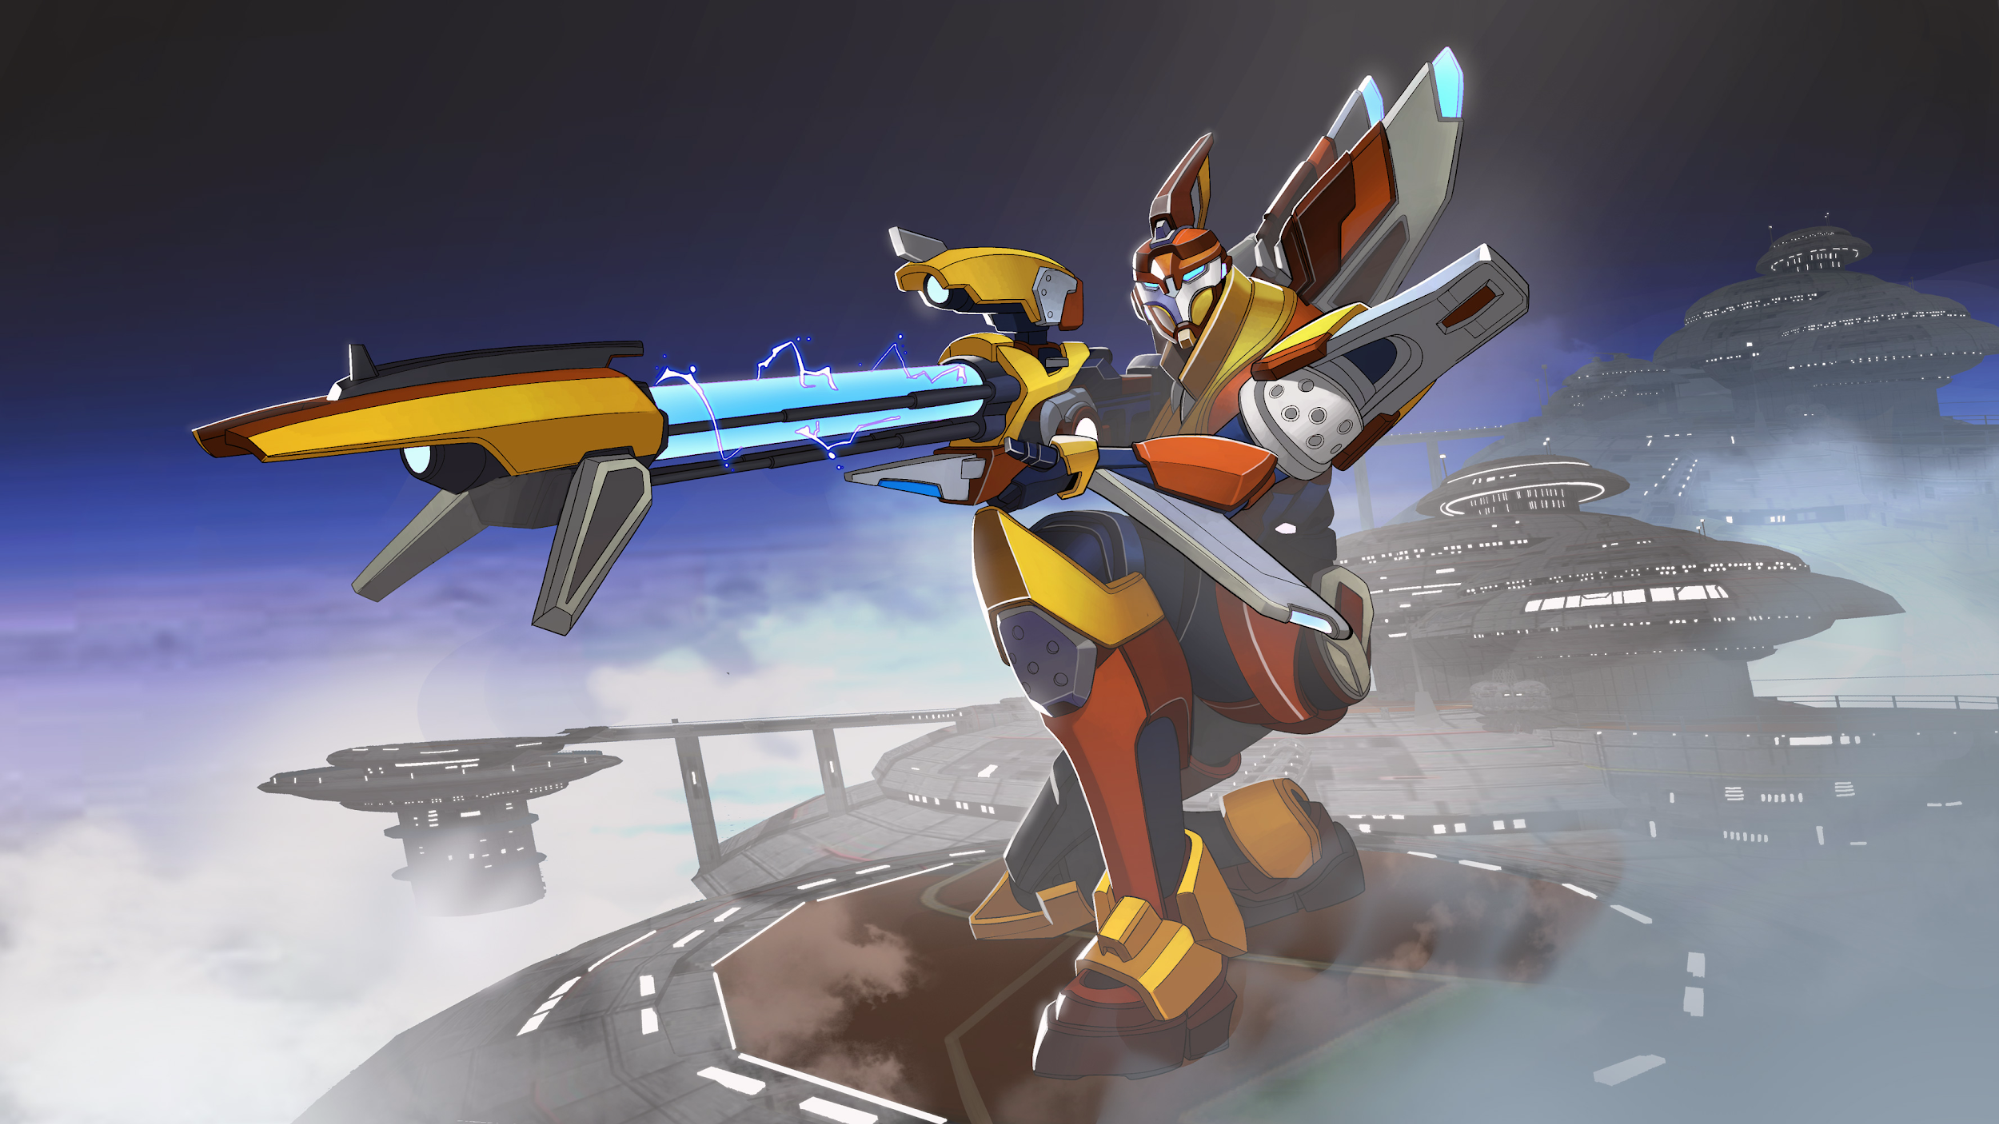 General 1999x1125 Paladins: Champions of the Realm video games video game art digital art sniper rifle robot cyborg Kinessa (Paladins) snipers futuristic